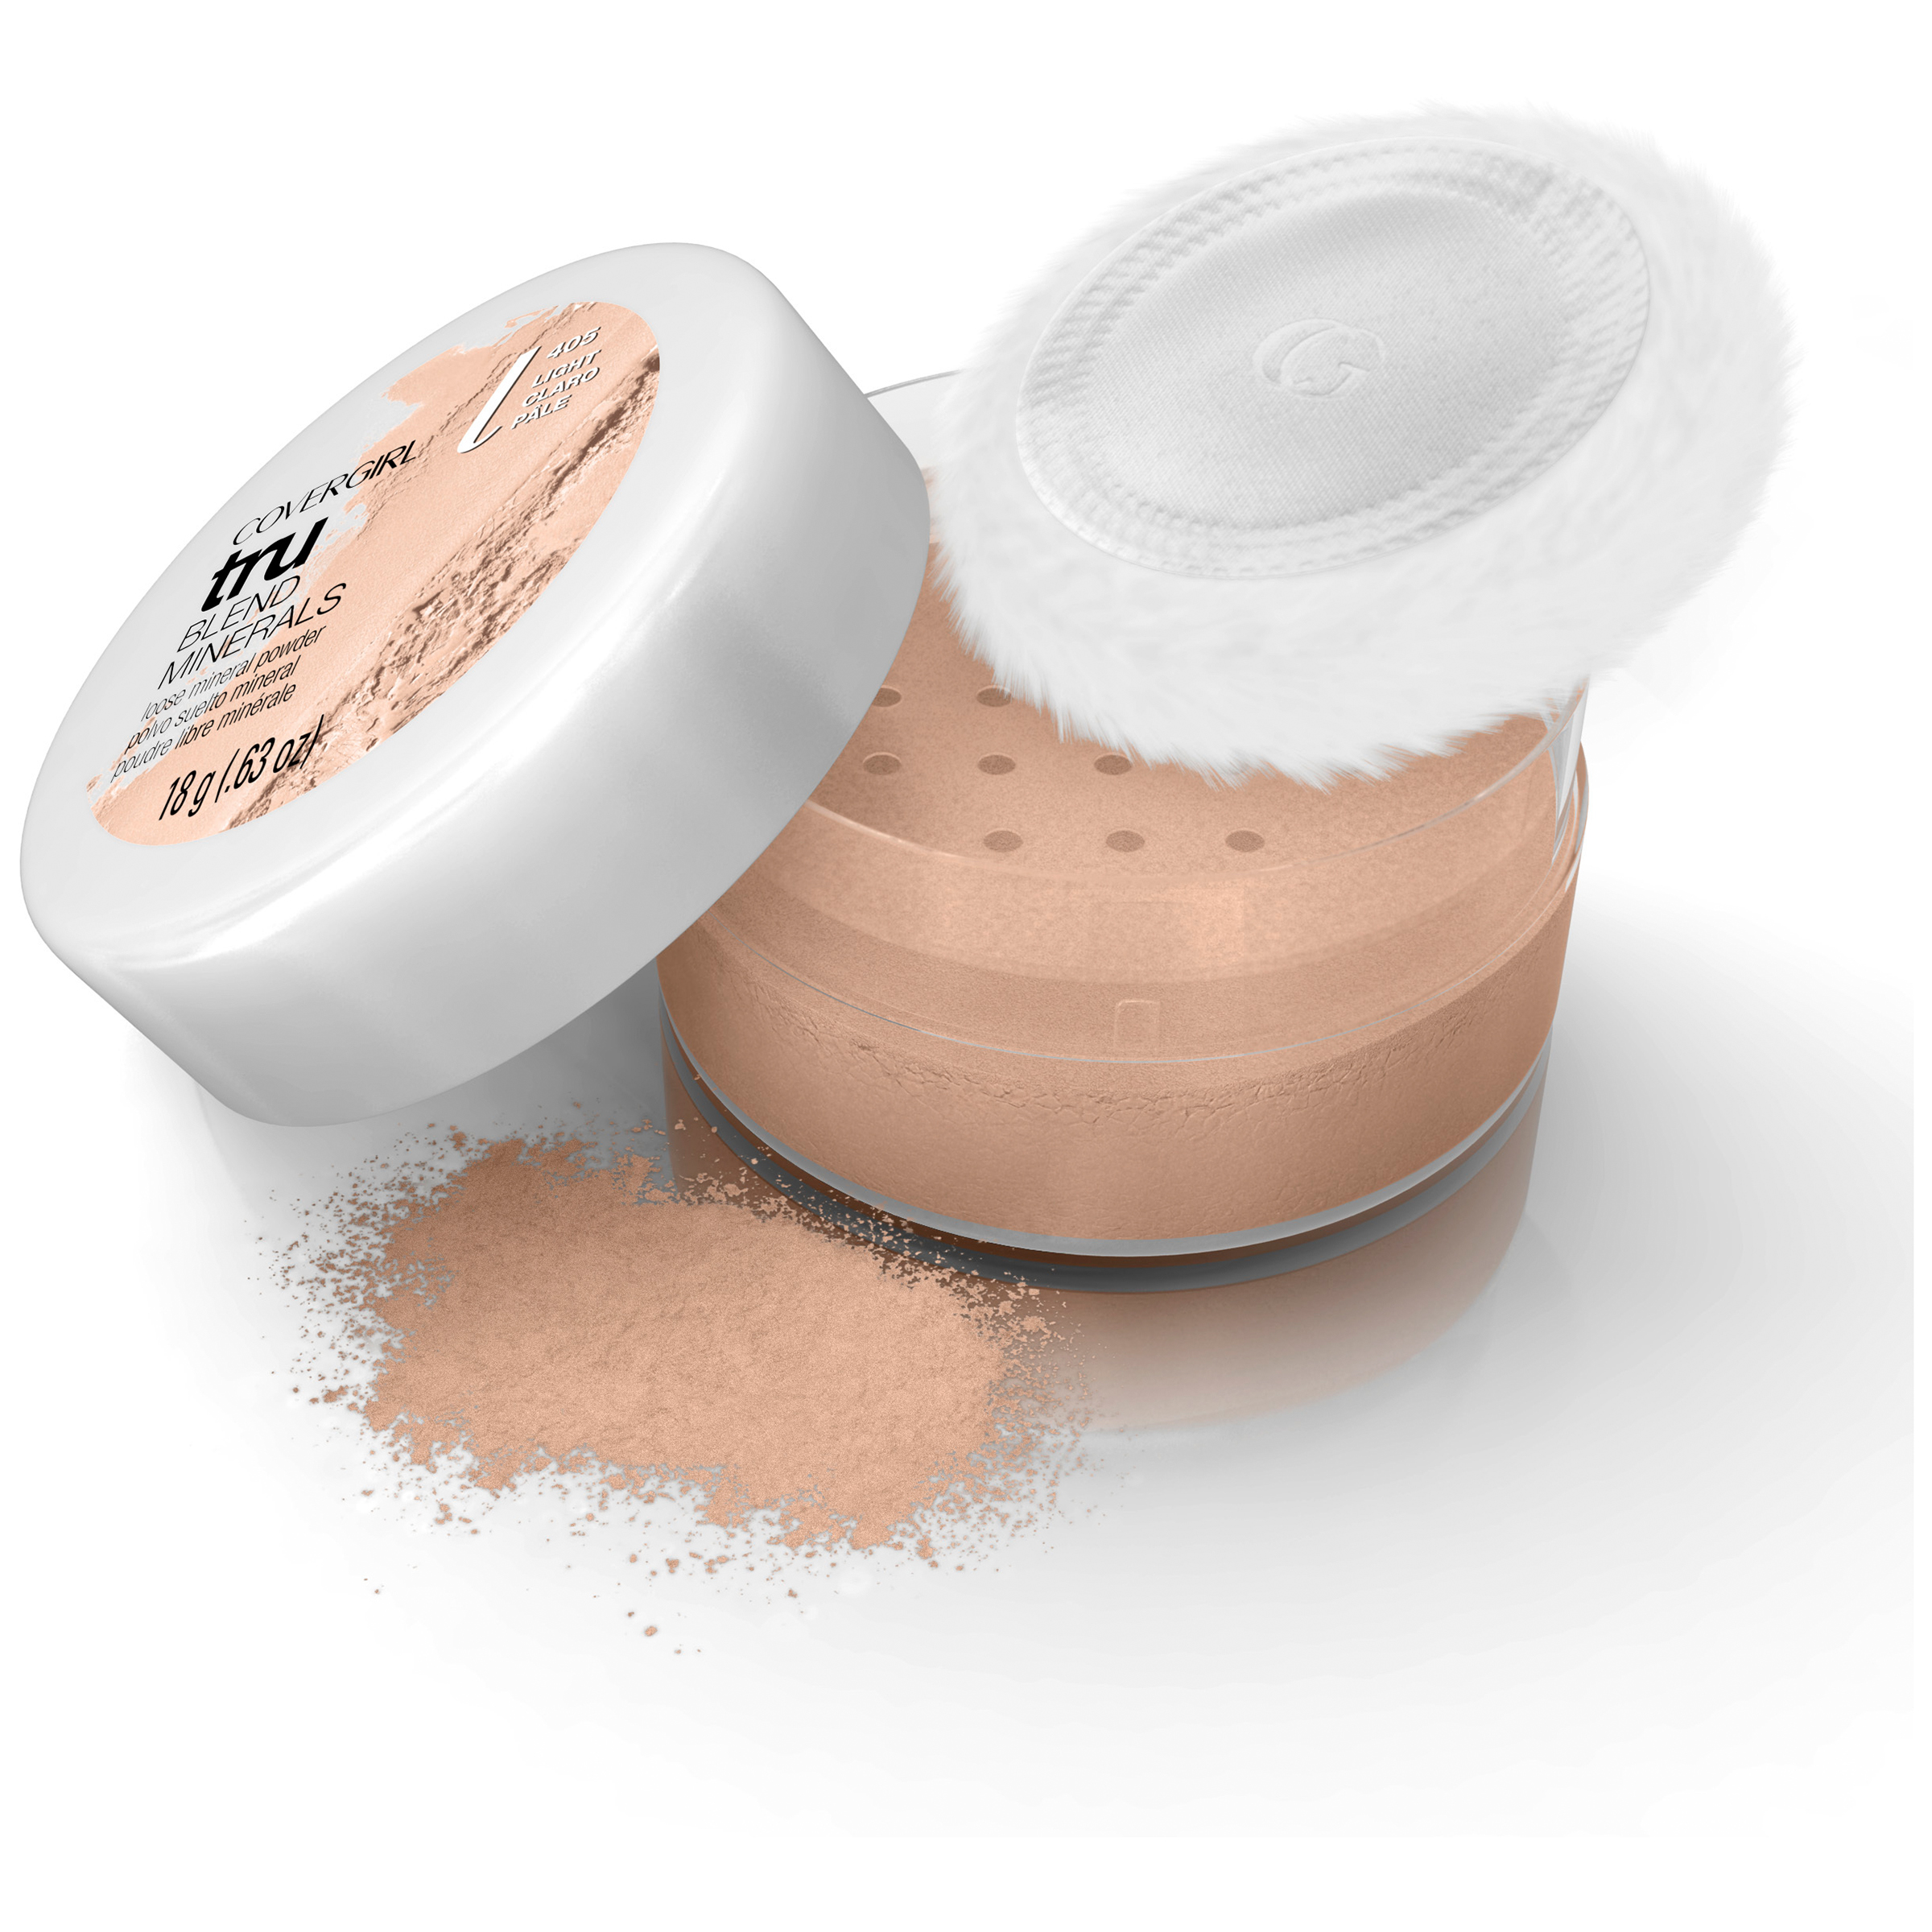 CoverGirl TruBlend Mineral Loose Powder Foundation